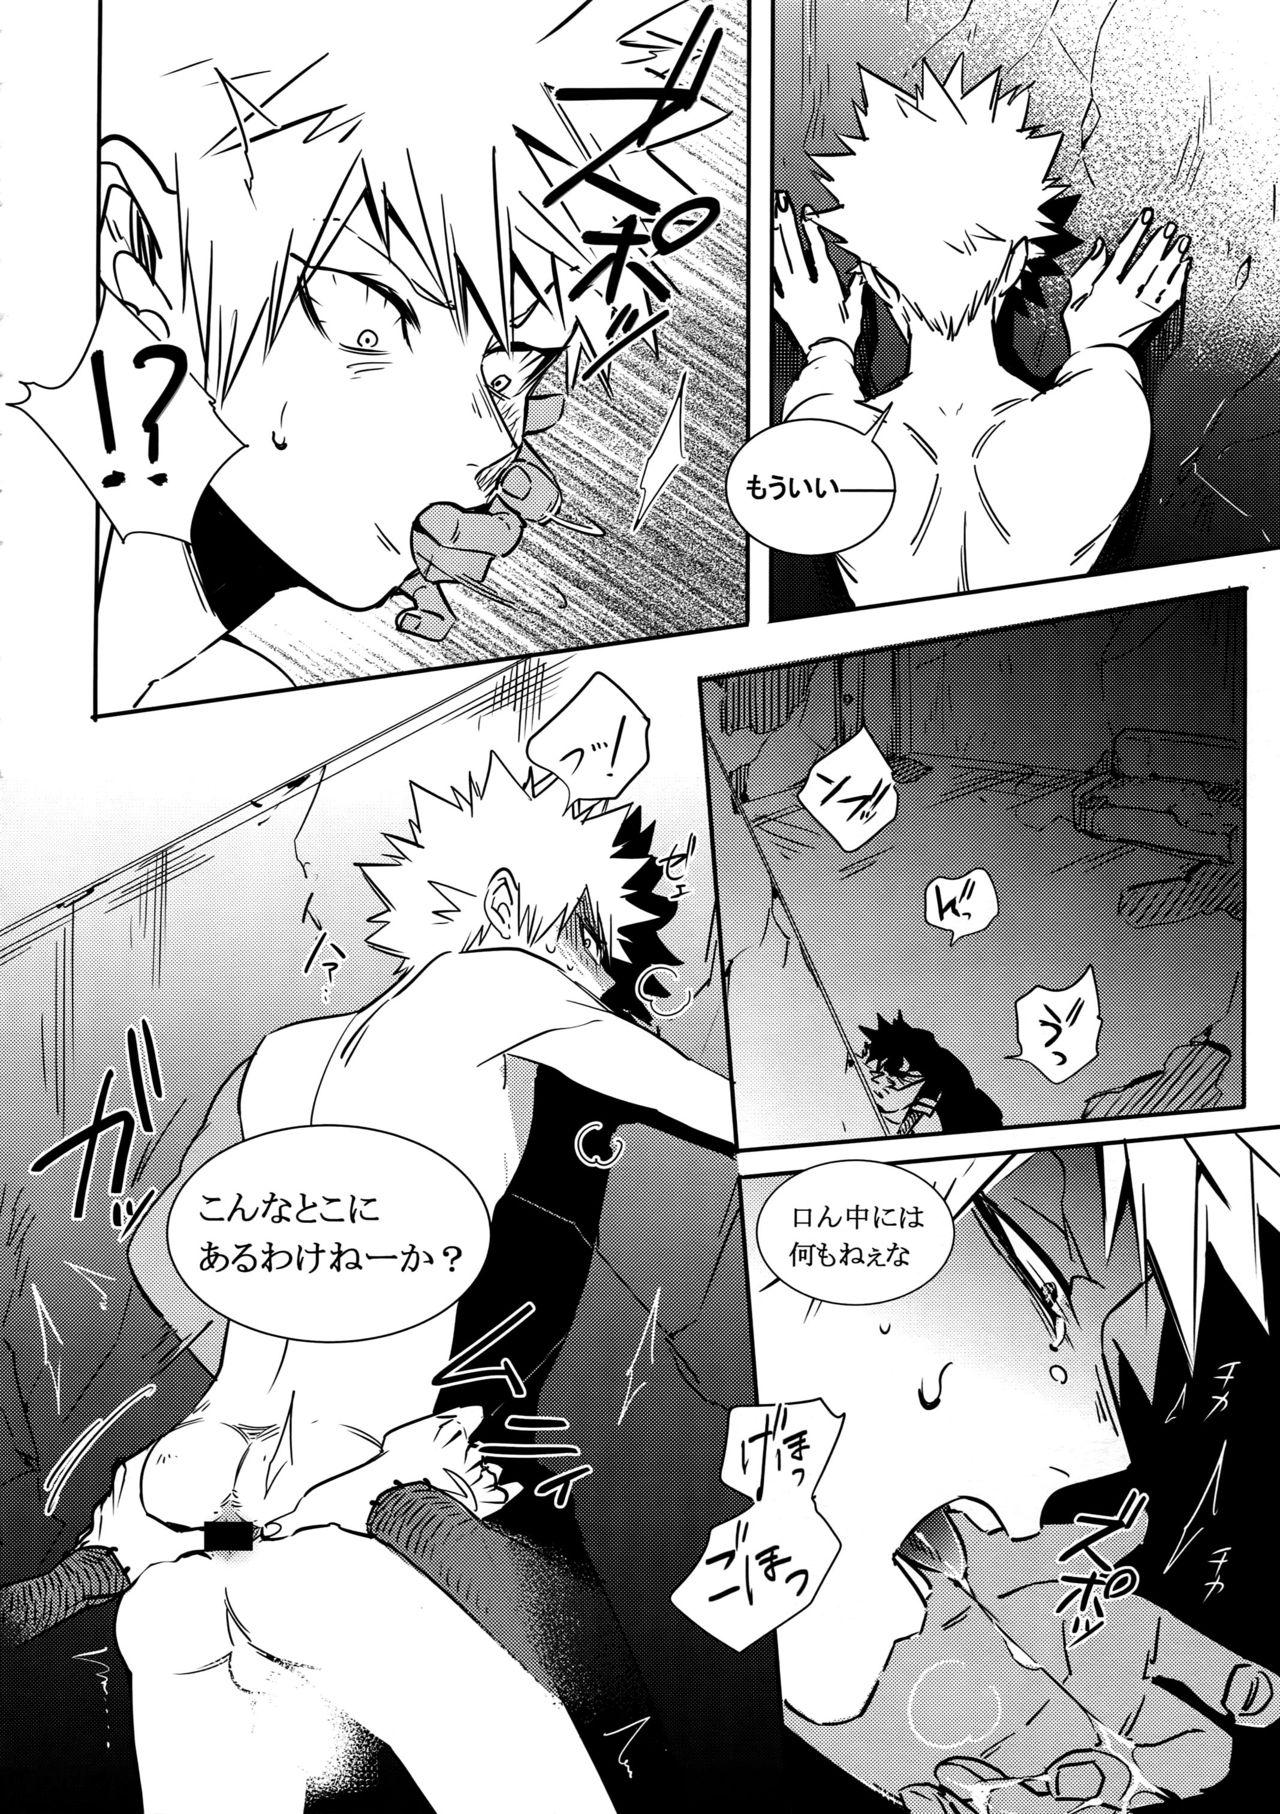 Sex Tape BAD END - My hero academia Full Movie - Page 10